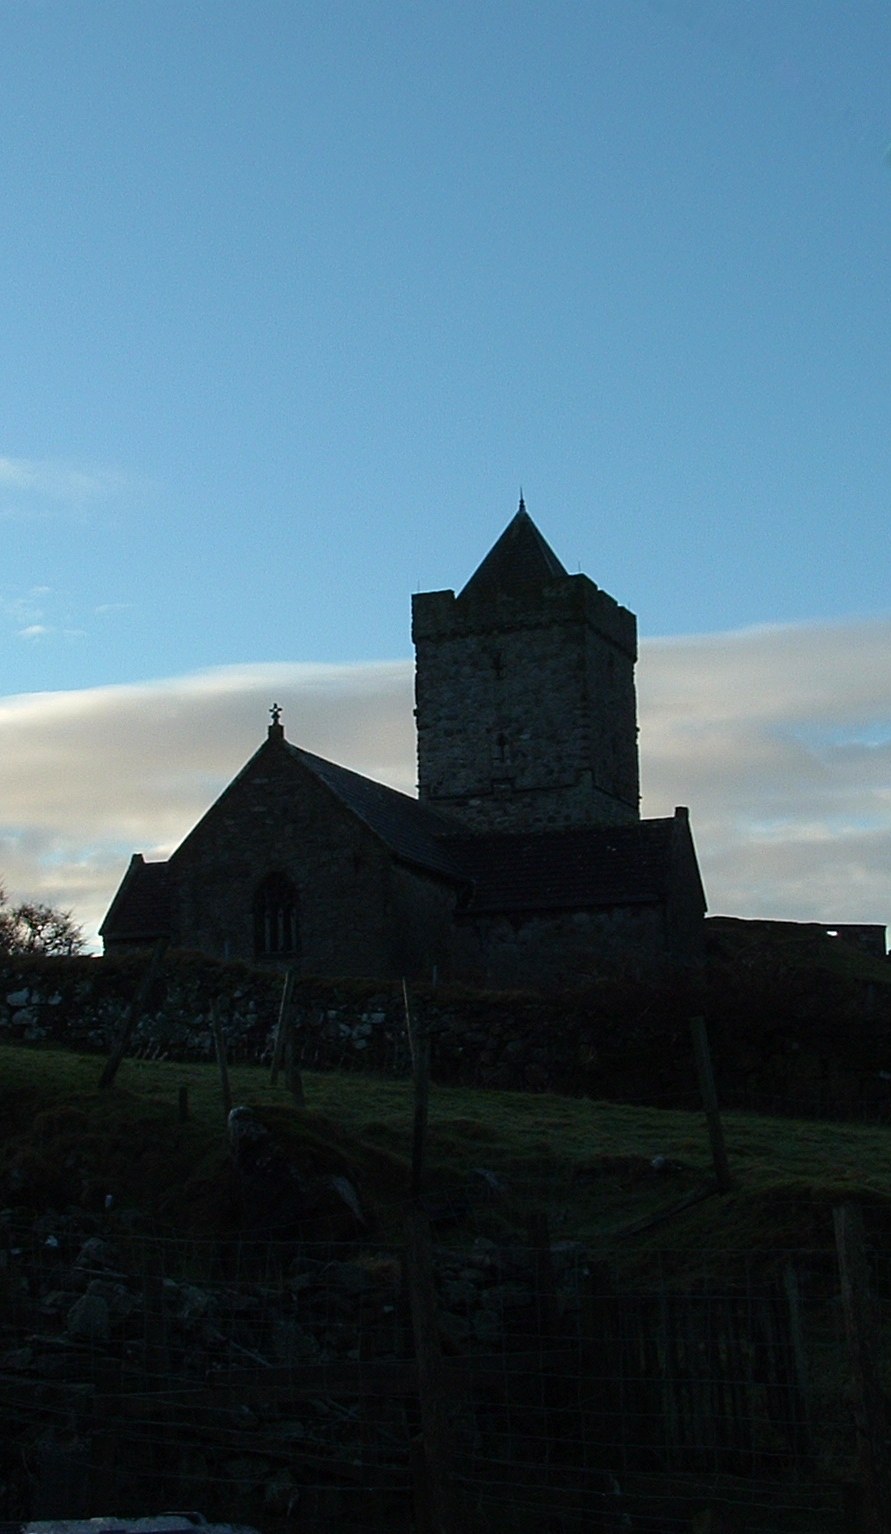 Photograph: St Clements Tall